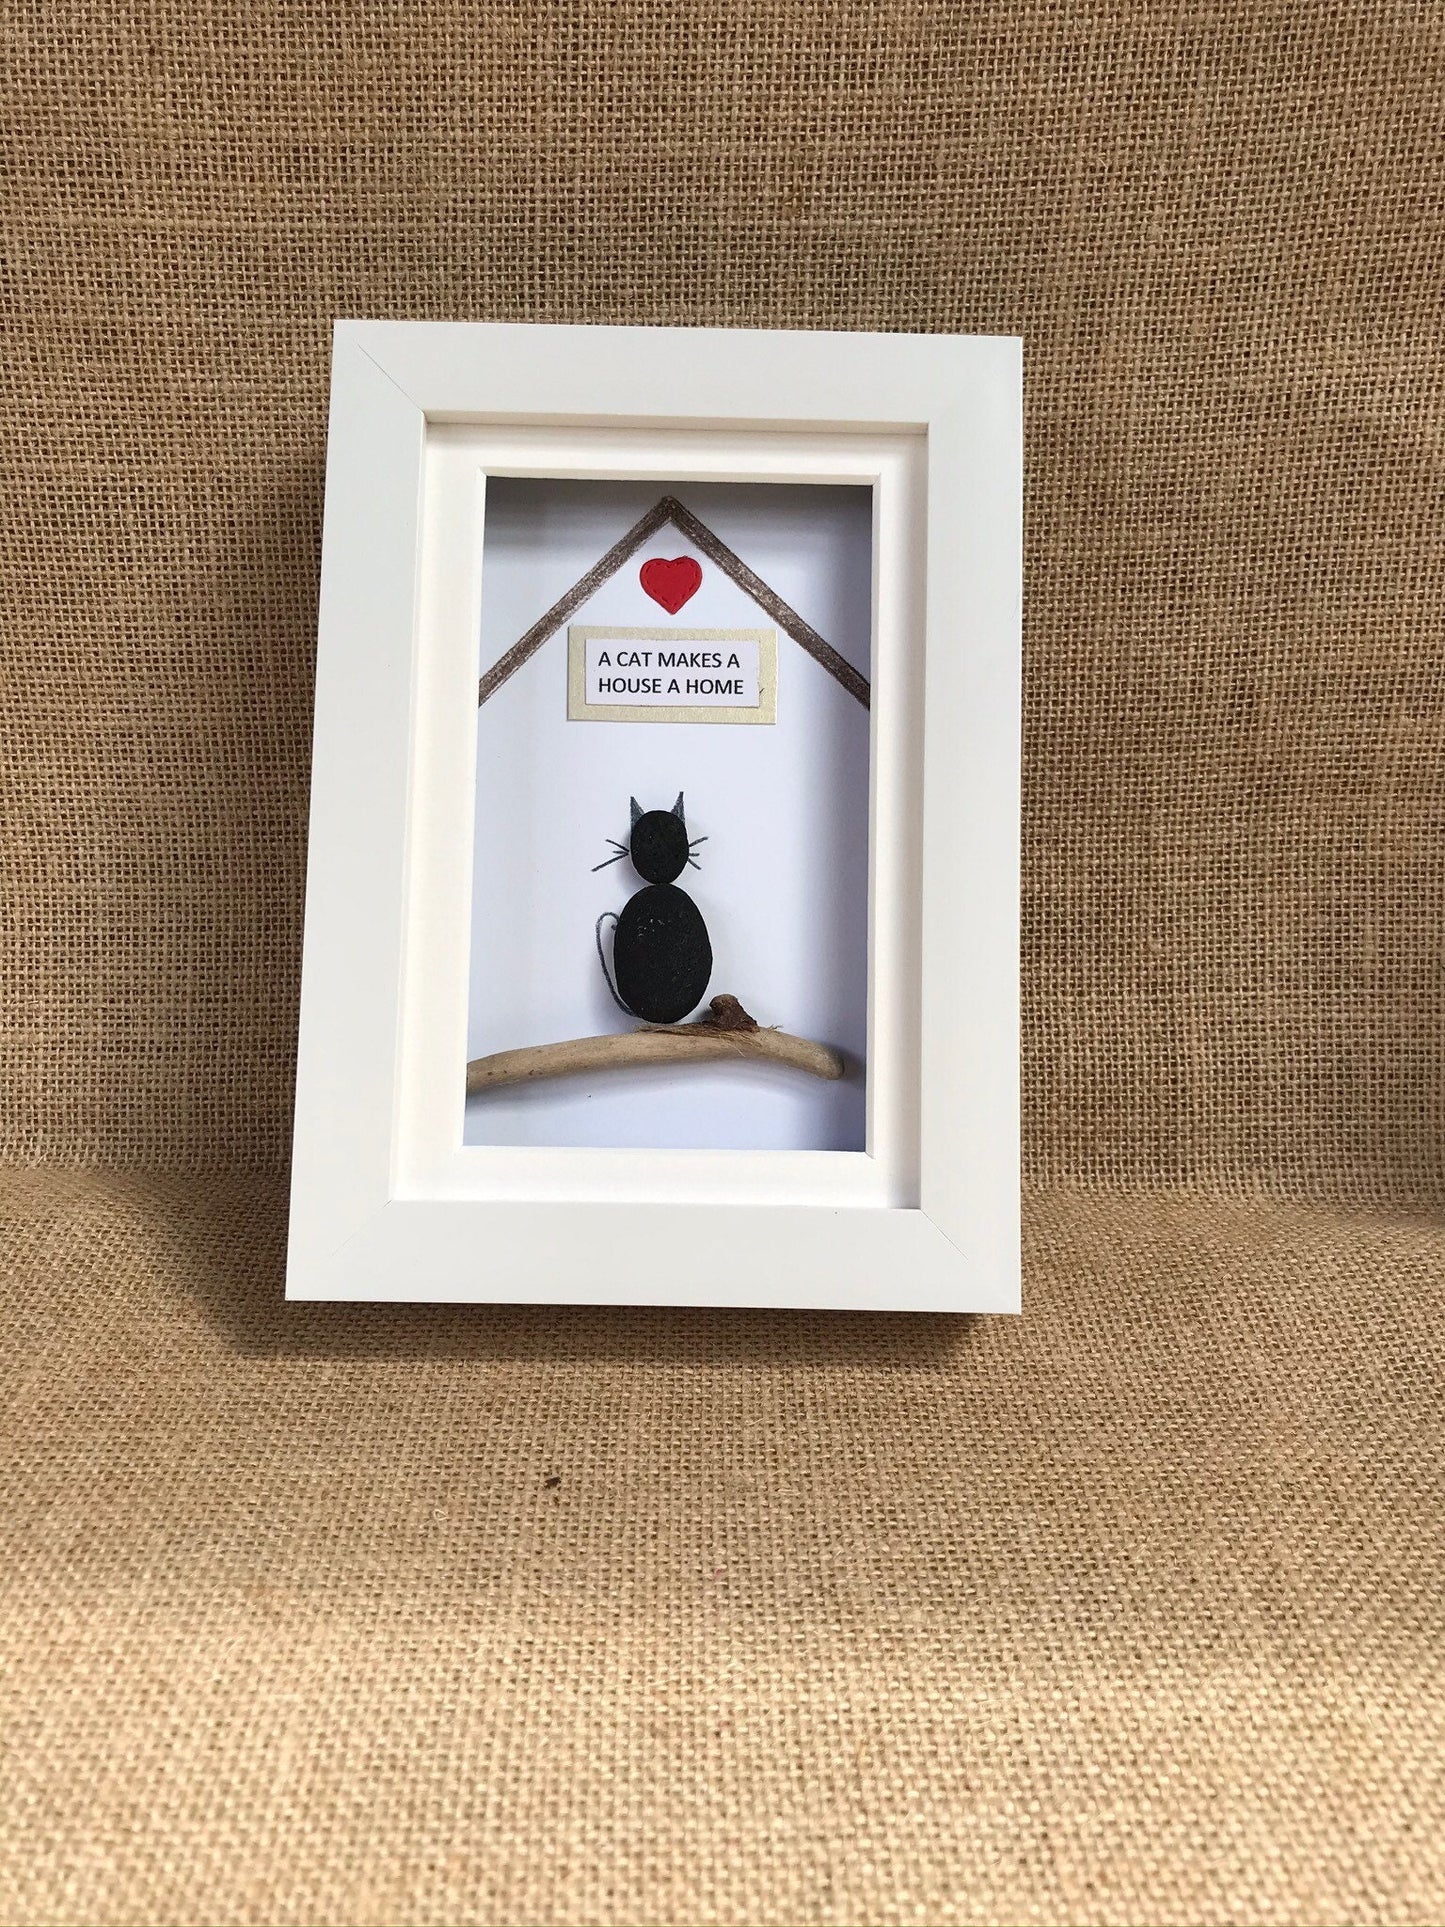 Handmade Cat Pebble Art Picture - Makes a House a Home